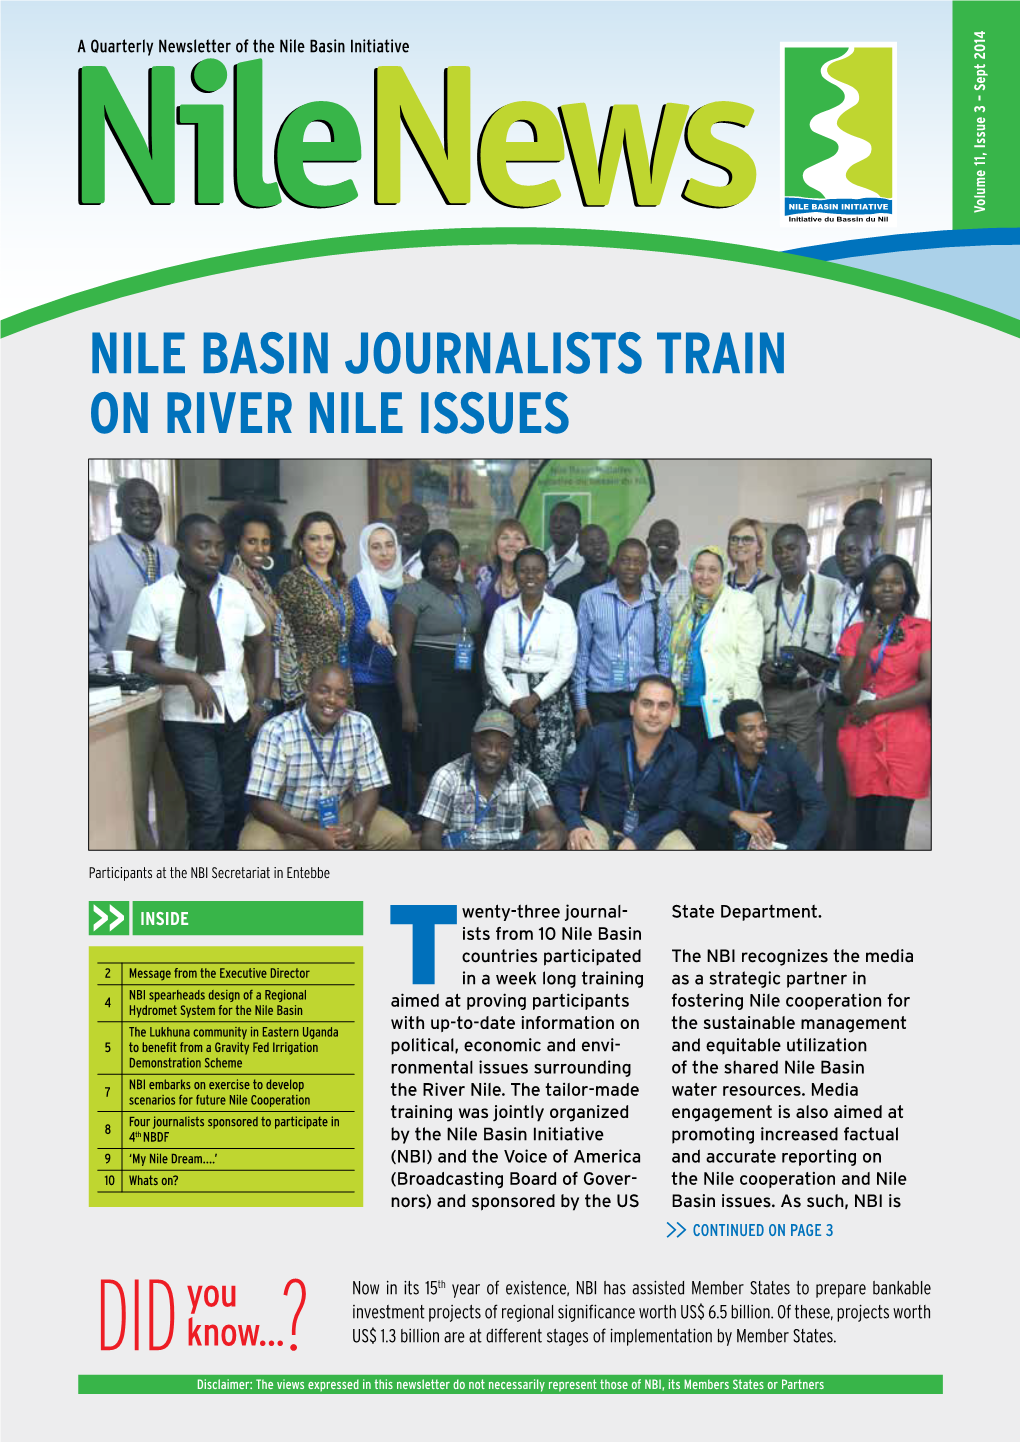 Nile Basin Journalists Train on River Nile Issues